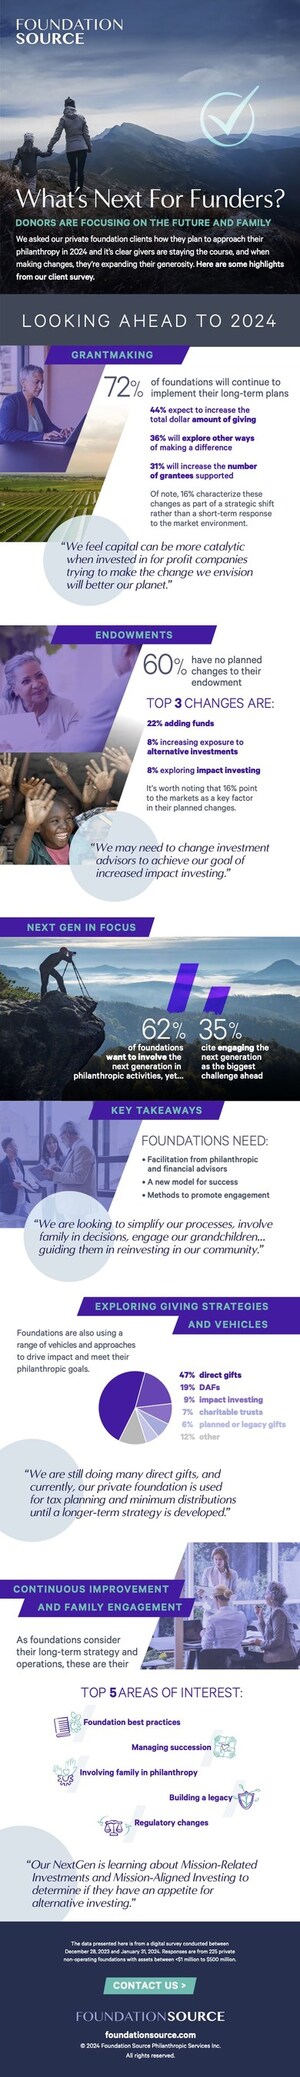 ENGAGING THE NEXT GENERATION SEEN AS THE BIGGEST HEADWIND FOR PRIVATE FOUNDATIONS IN 2024